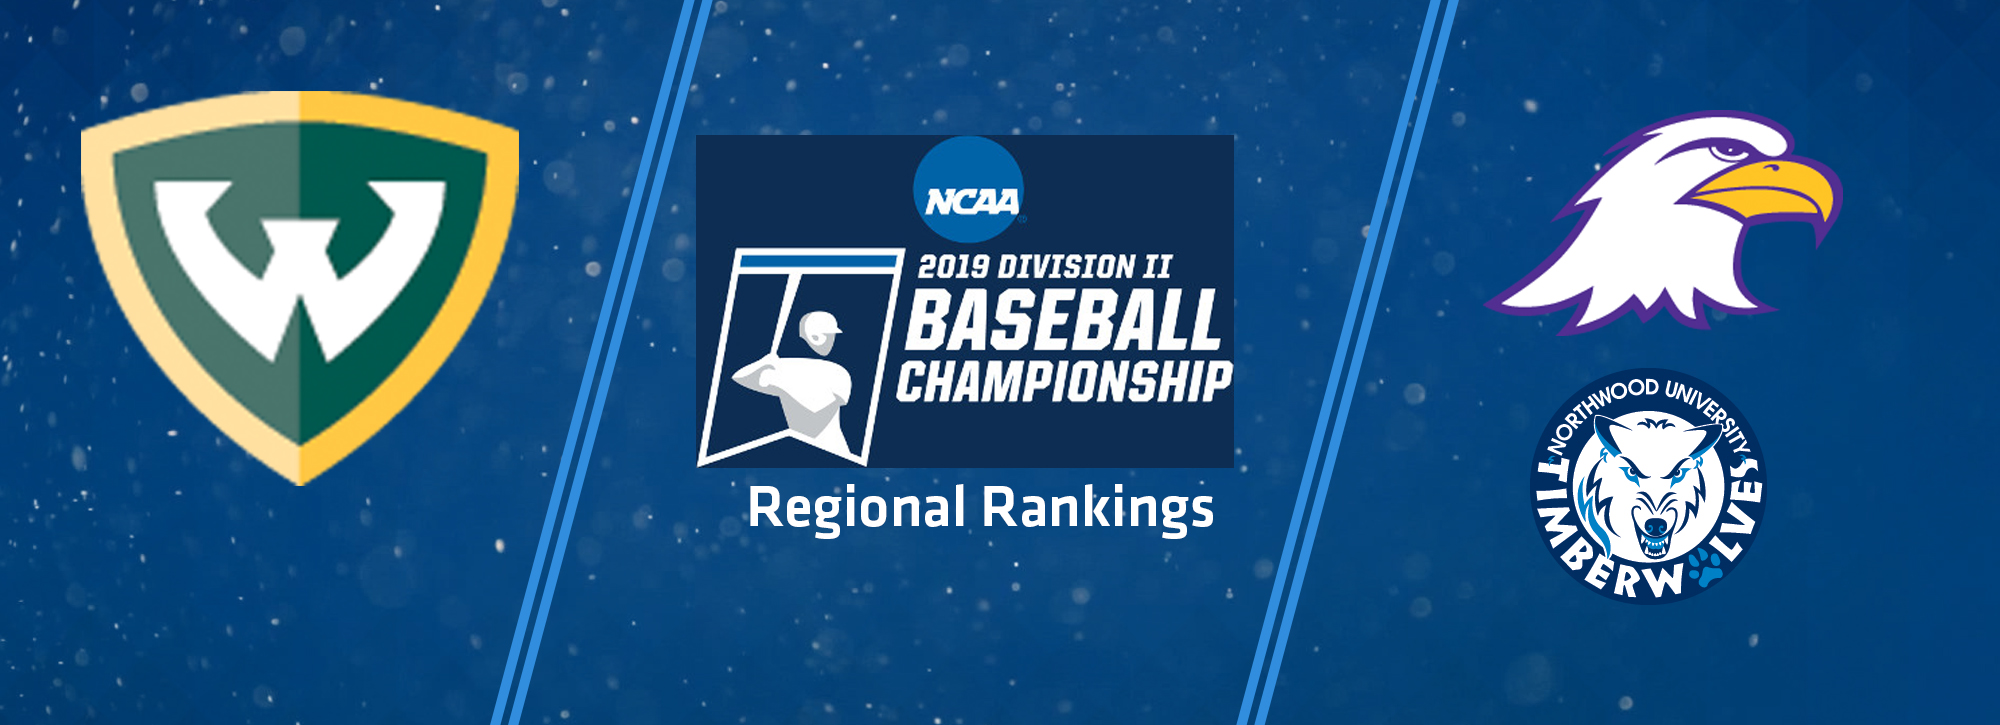 Ashland moves into top spot in NCAA Midwest Region Baseball Rankings